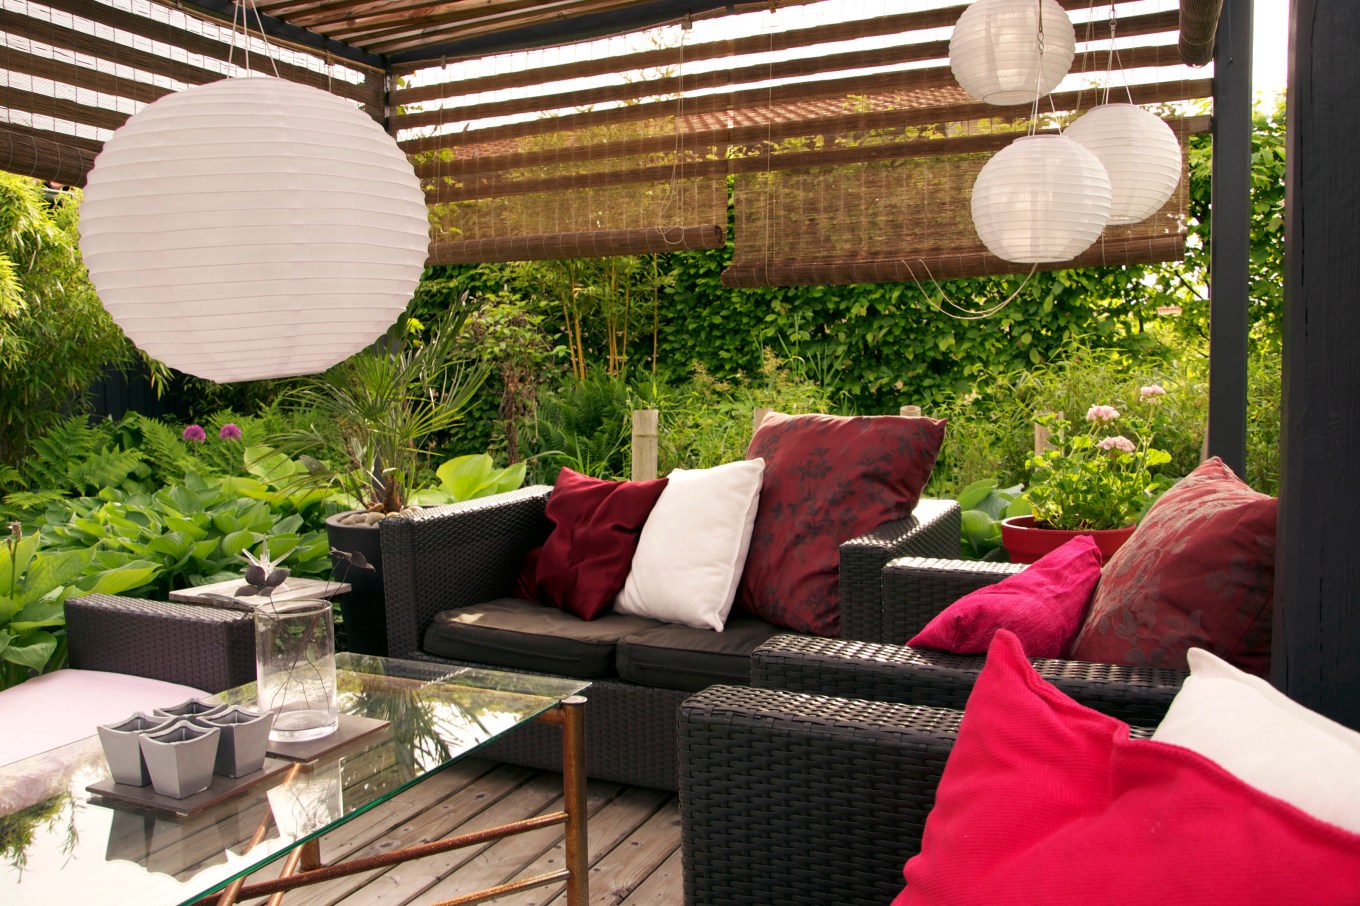 Reed shades giving privacy to a modern pergola in a backyard.